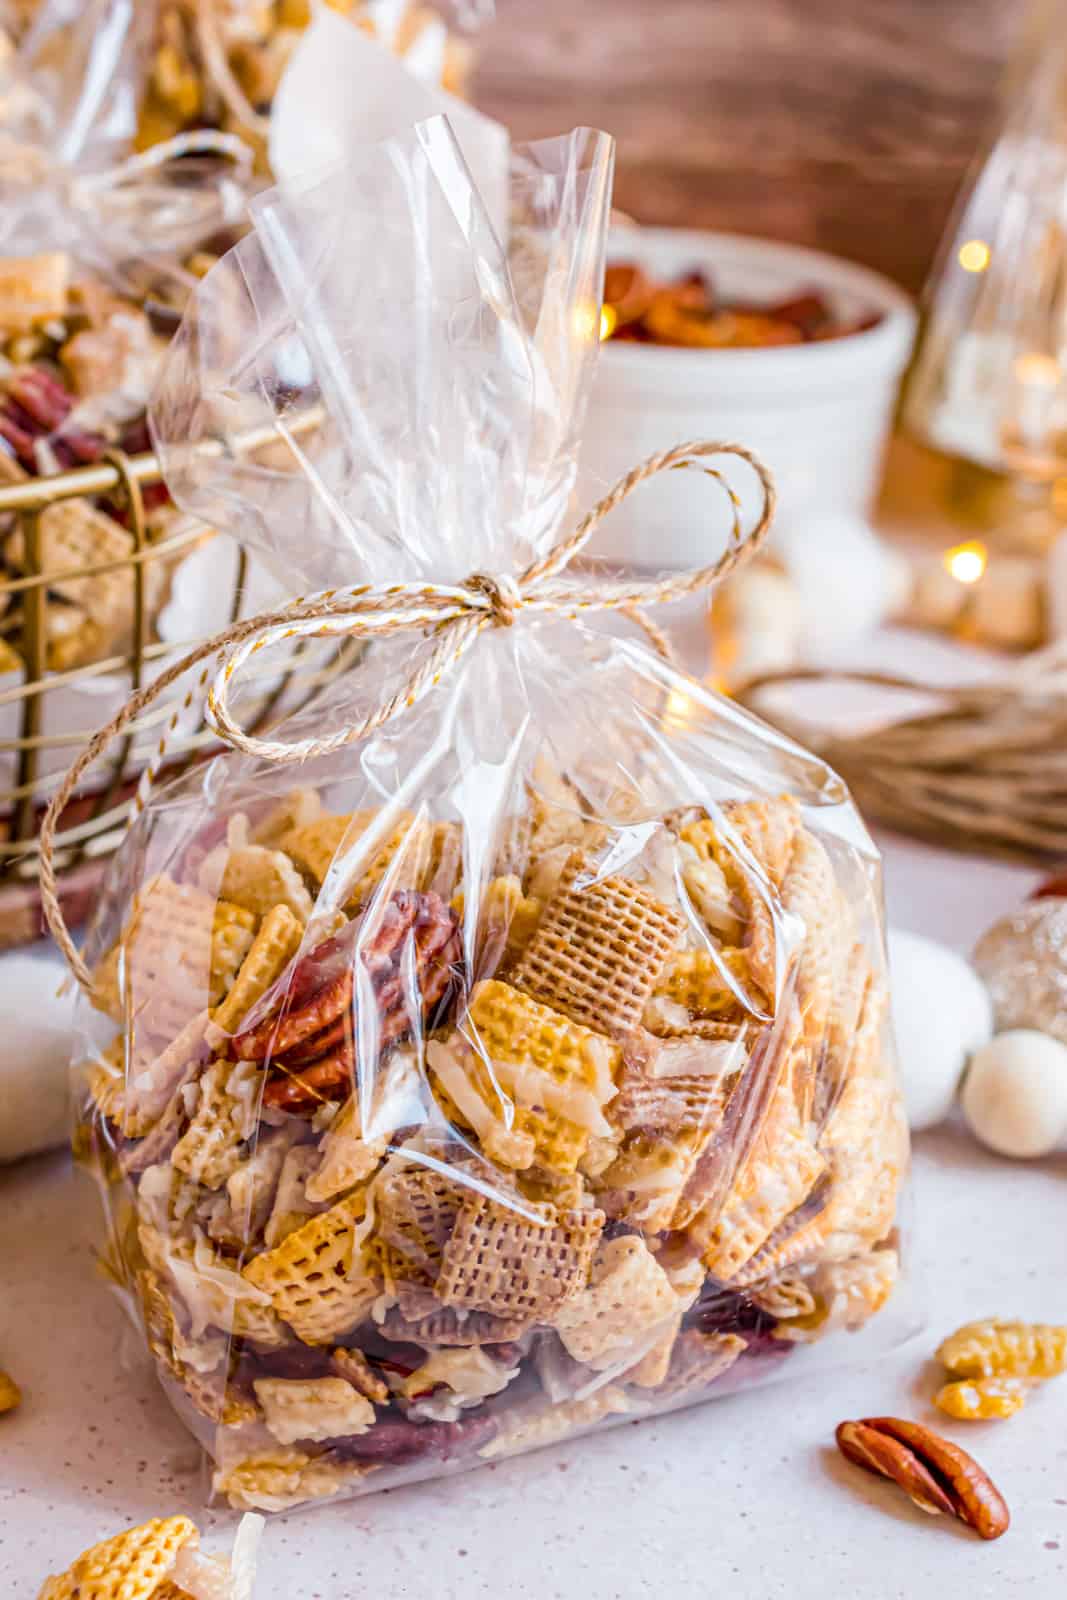 Bagged up Sweet Holiday Chex Mix for gift giving.